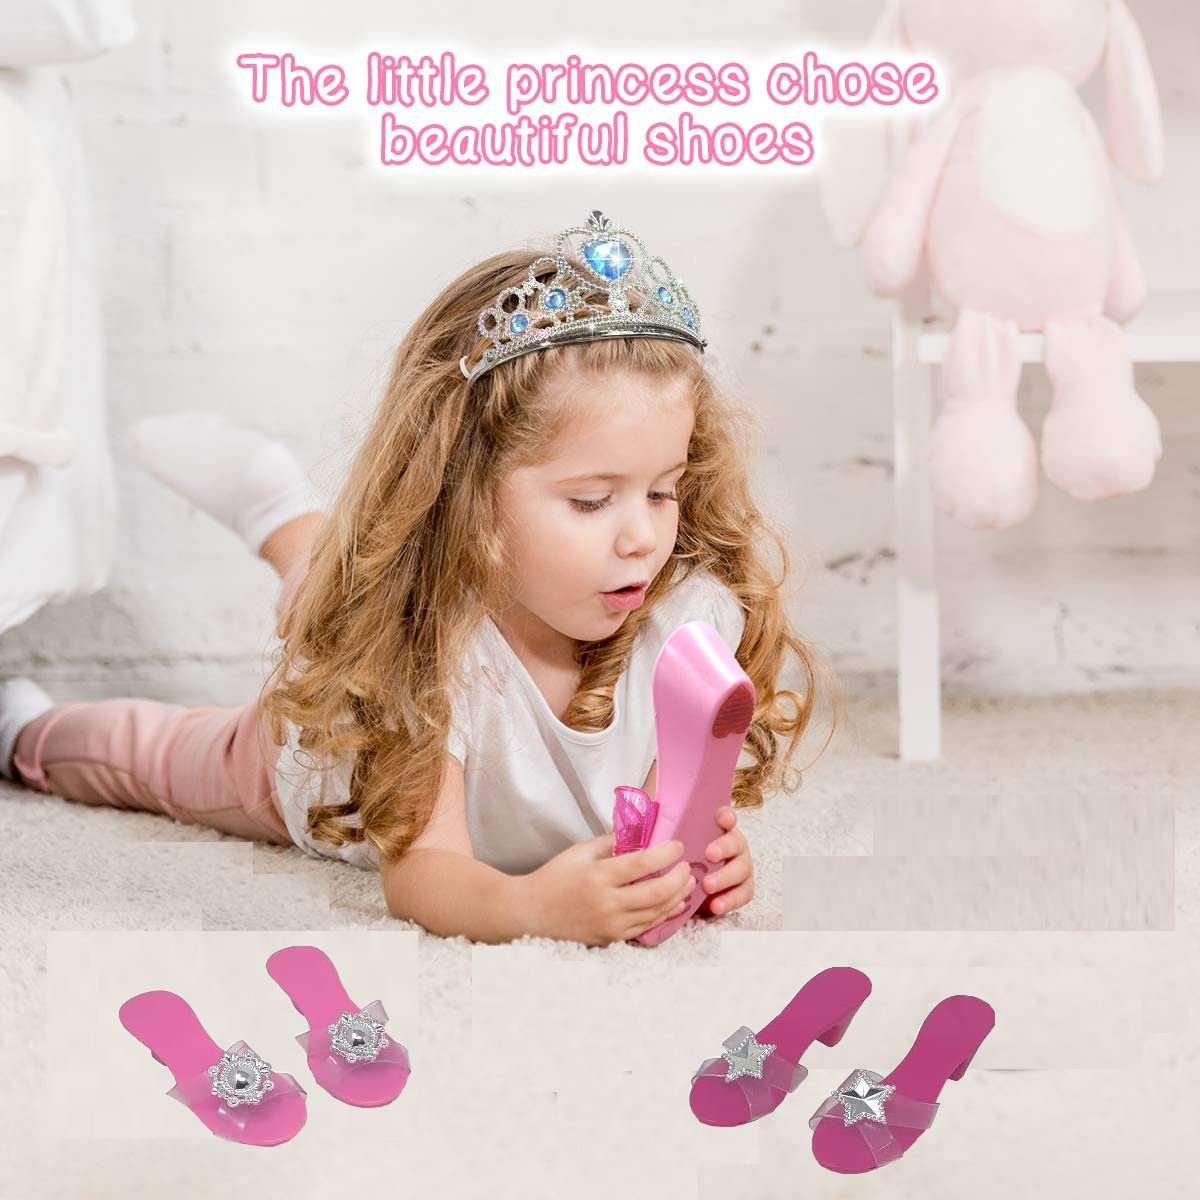 Girls Princess Dress Up Shoes and Jewelry Boutique, Princess Role Play Shoes Collection Set with 4 Pairs of Shoes and 2 Tiaras for Little Girl Aged 3+